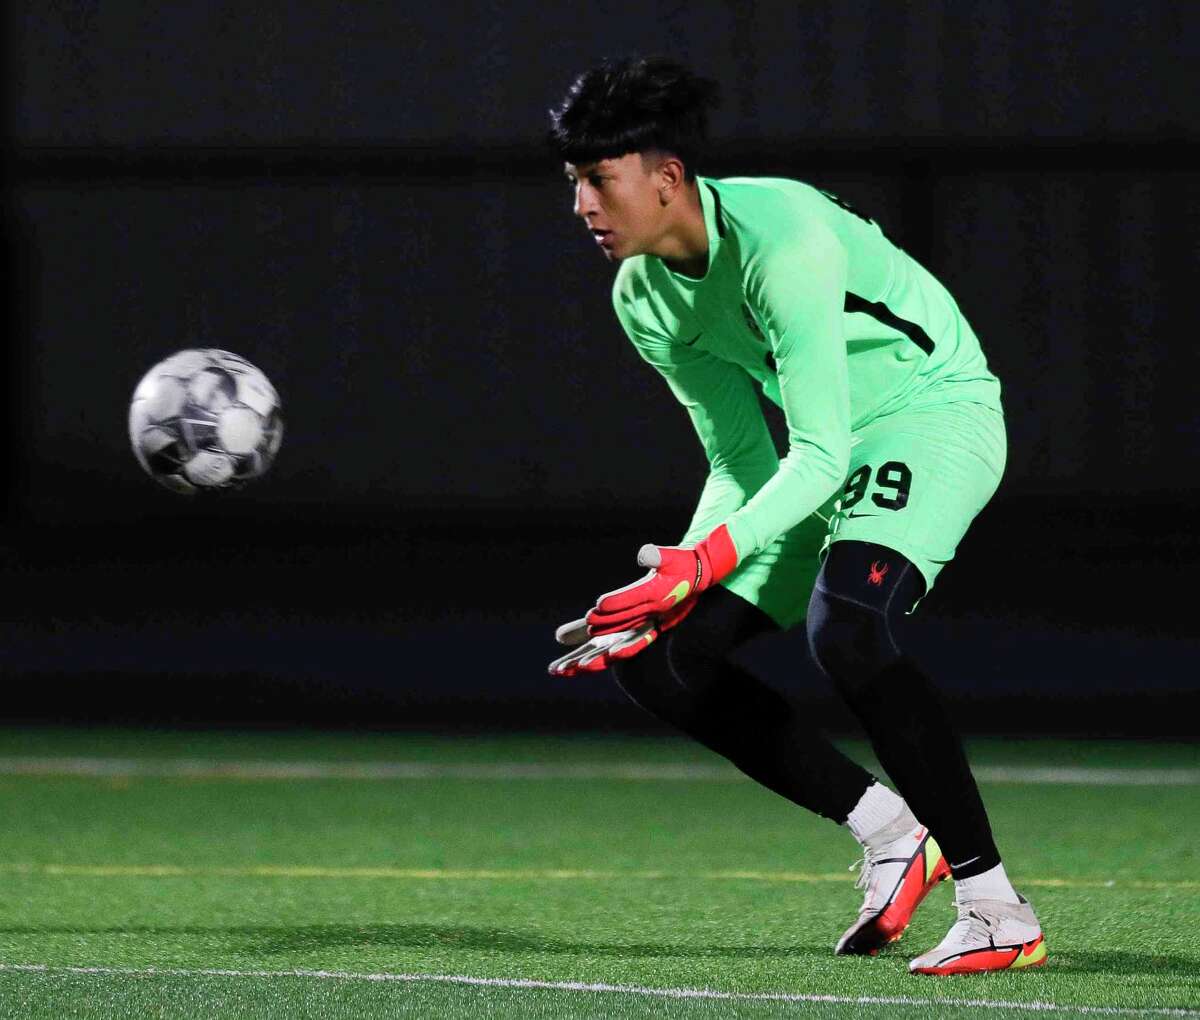 Conroe goalie Axel Pecinos (99) makes a stop in the first period of a high school soccer match at Grand Oaks High School, Tuesday, Feb. 8, 2022, in Spring.